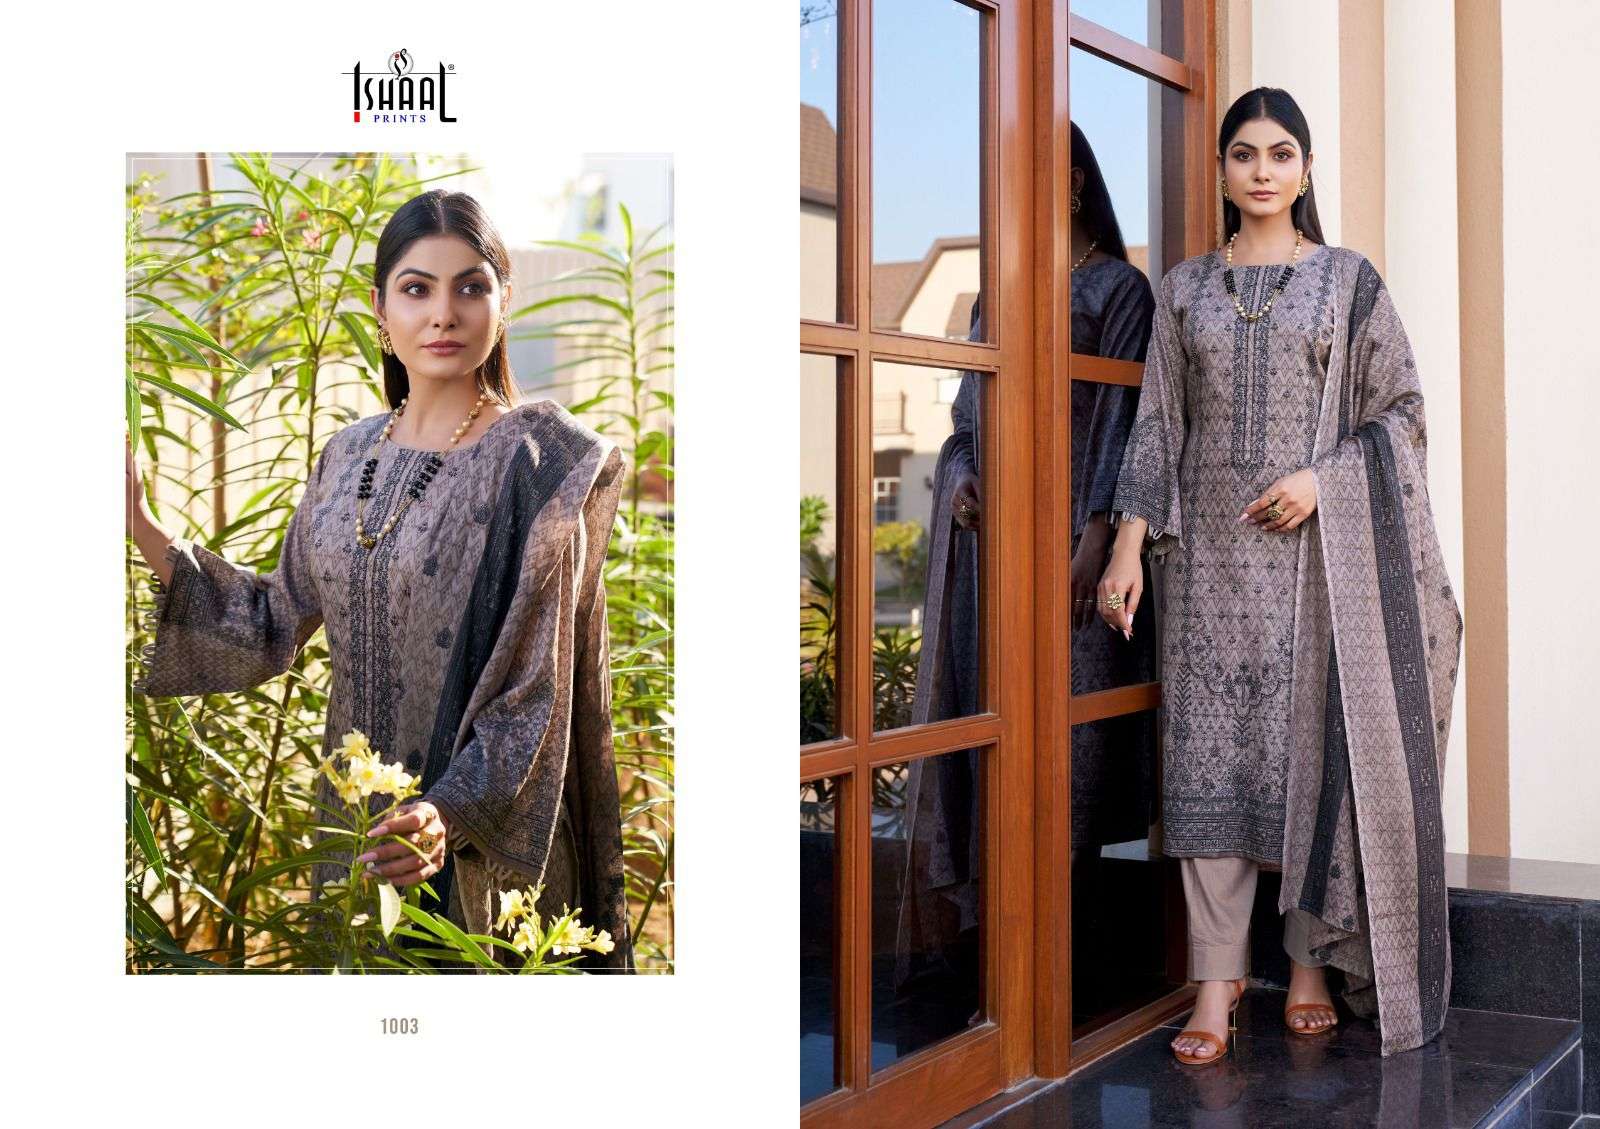 ISHAAL PRINTS EMBROIDERED LAWN COMBO